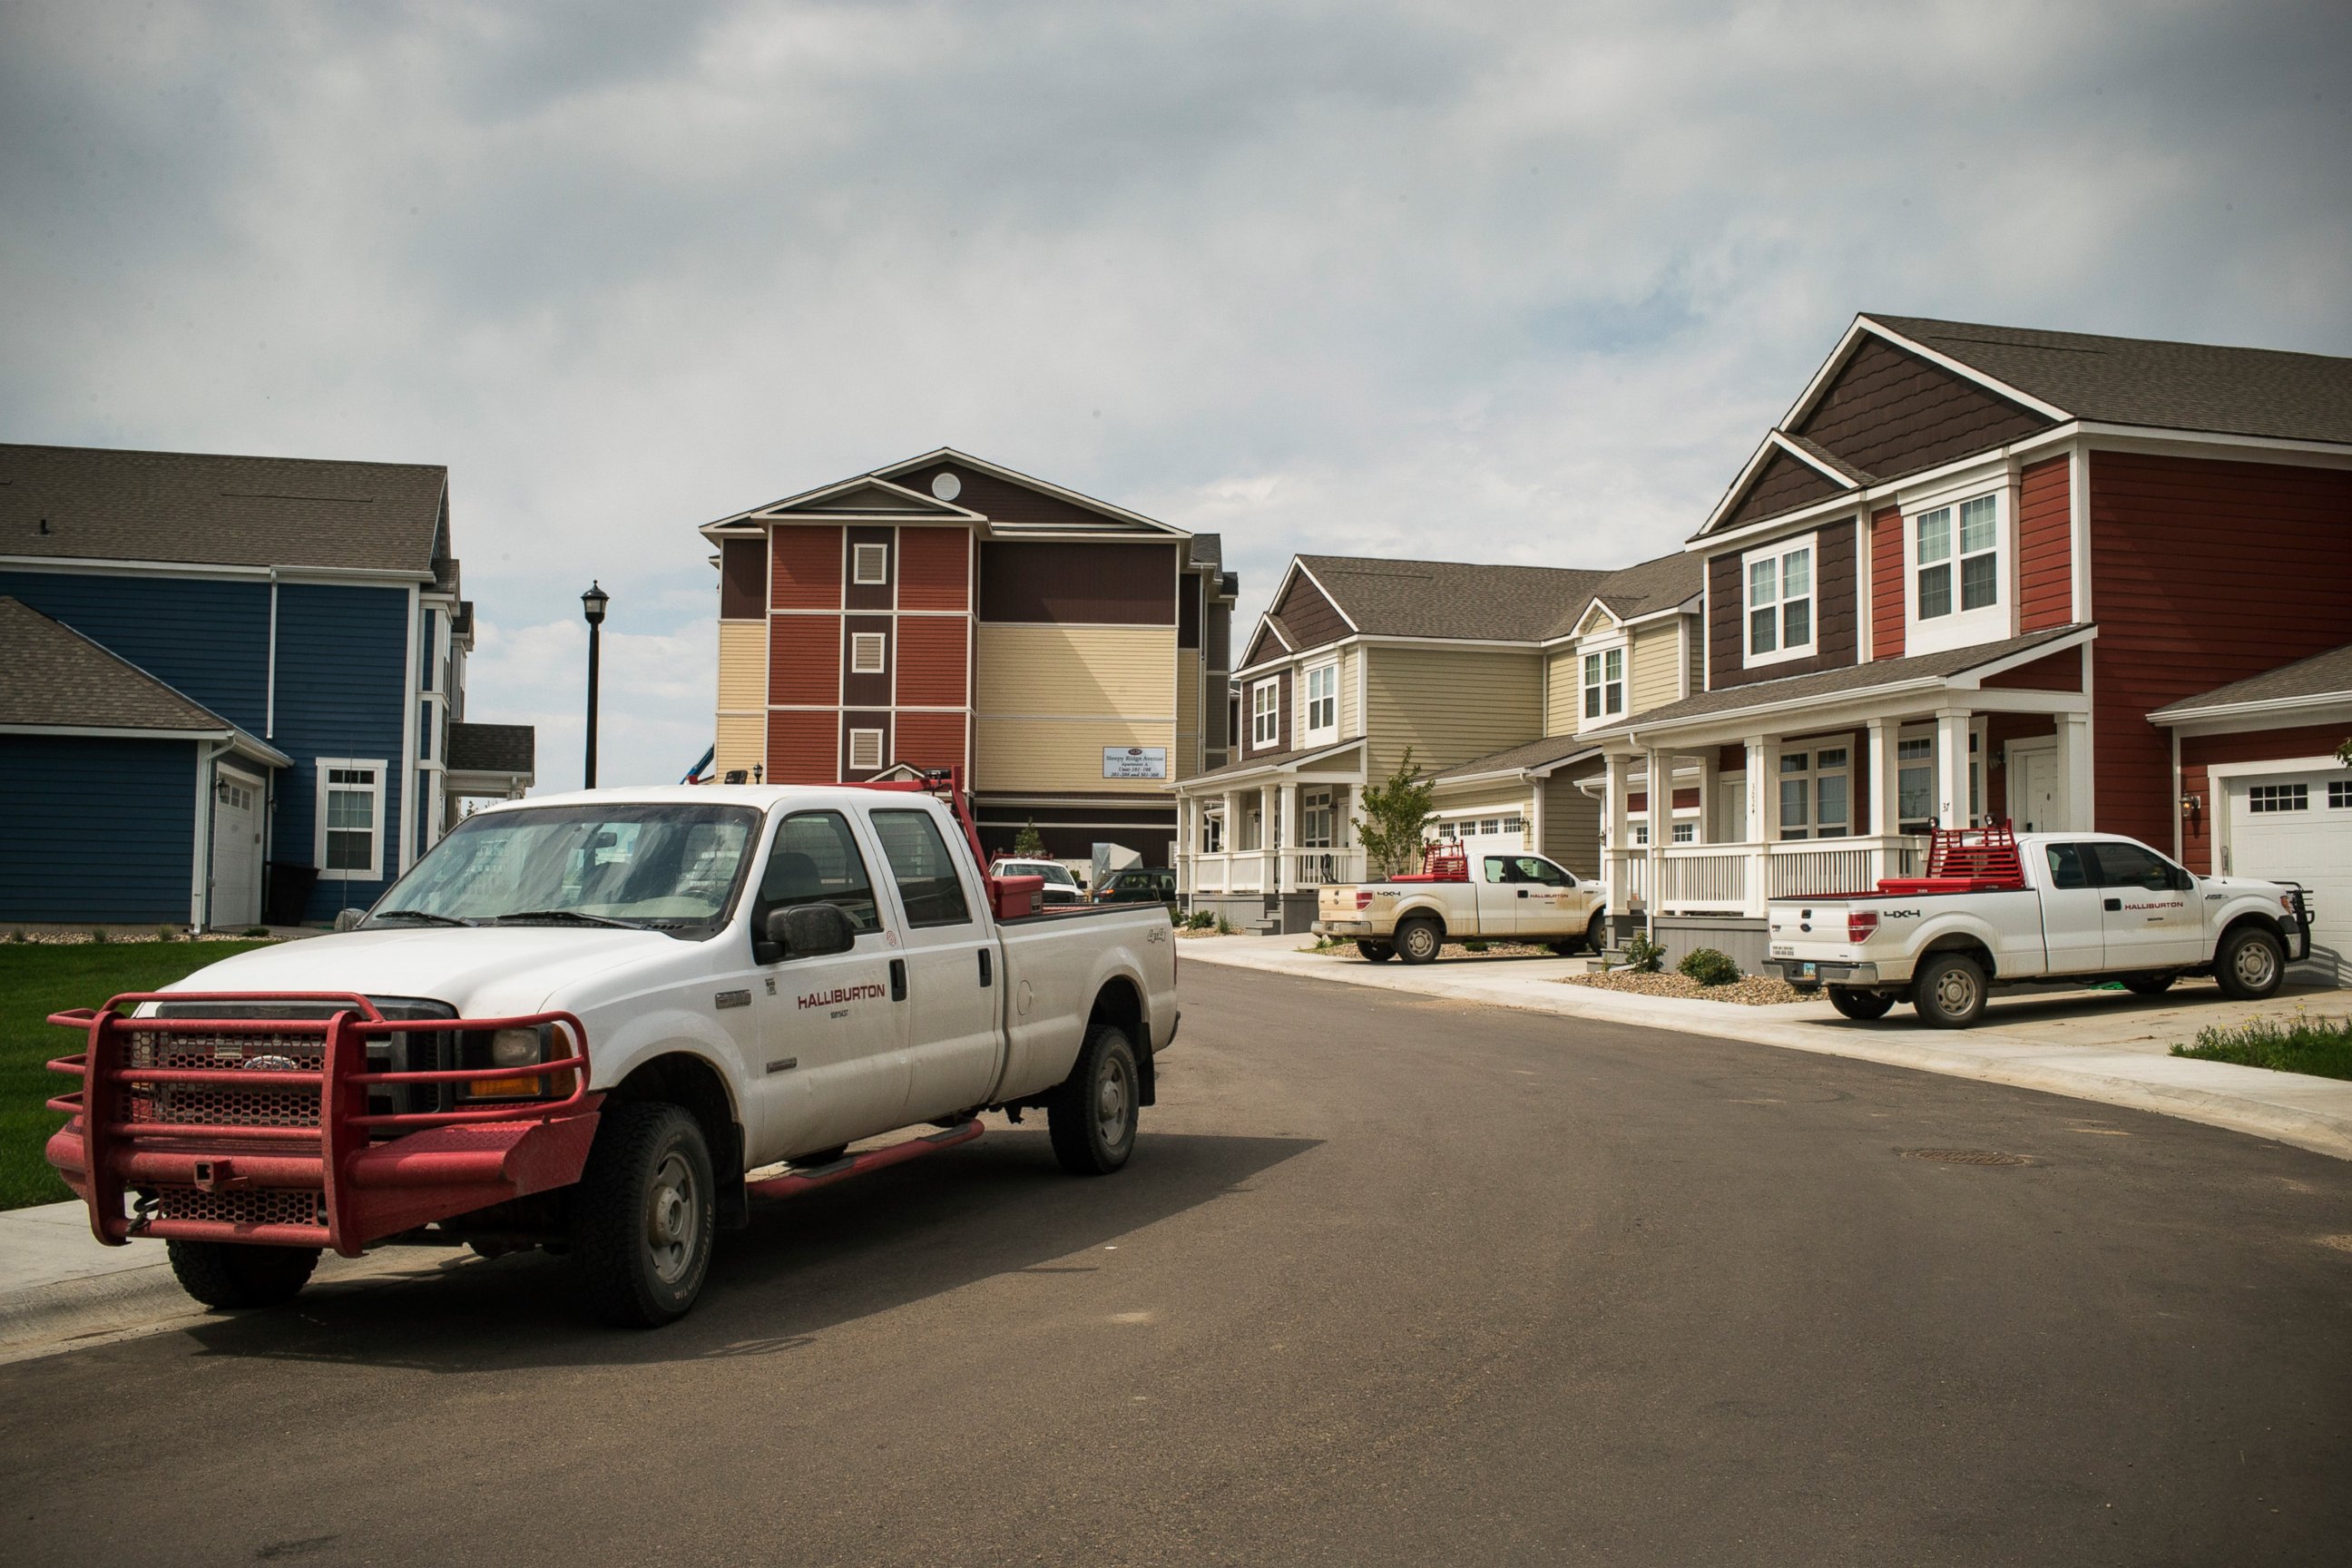 PHOTO: Trucks are parked near new homes rented by oil workers, July 28, 2013, in Williston, North Dakota.  